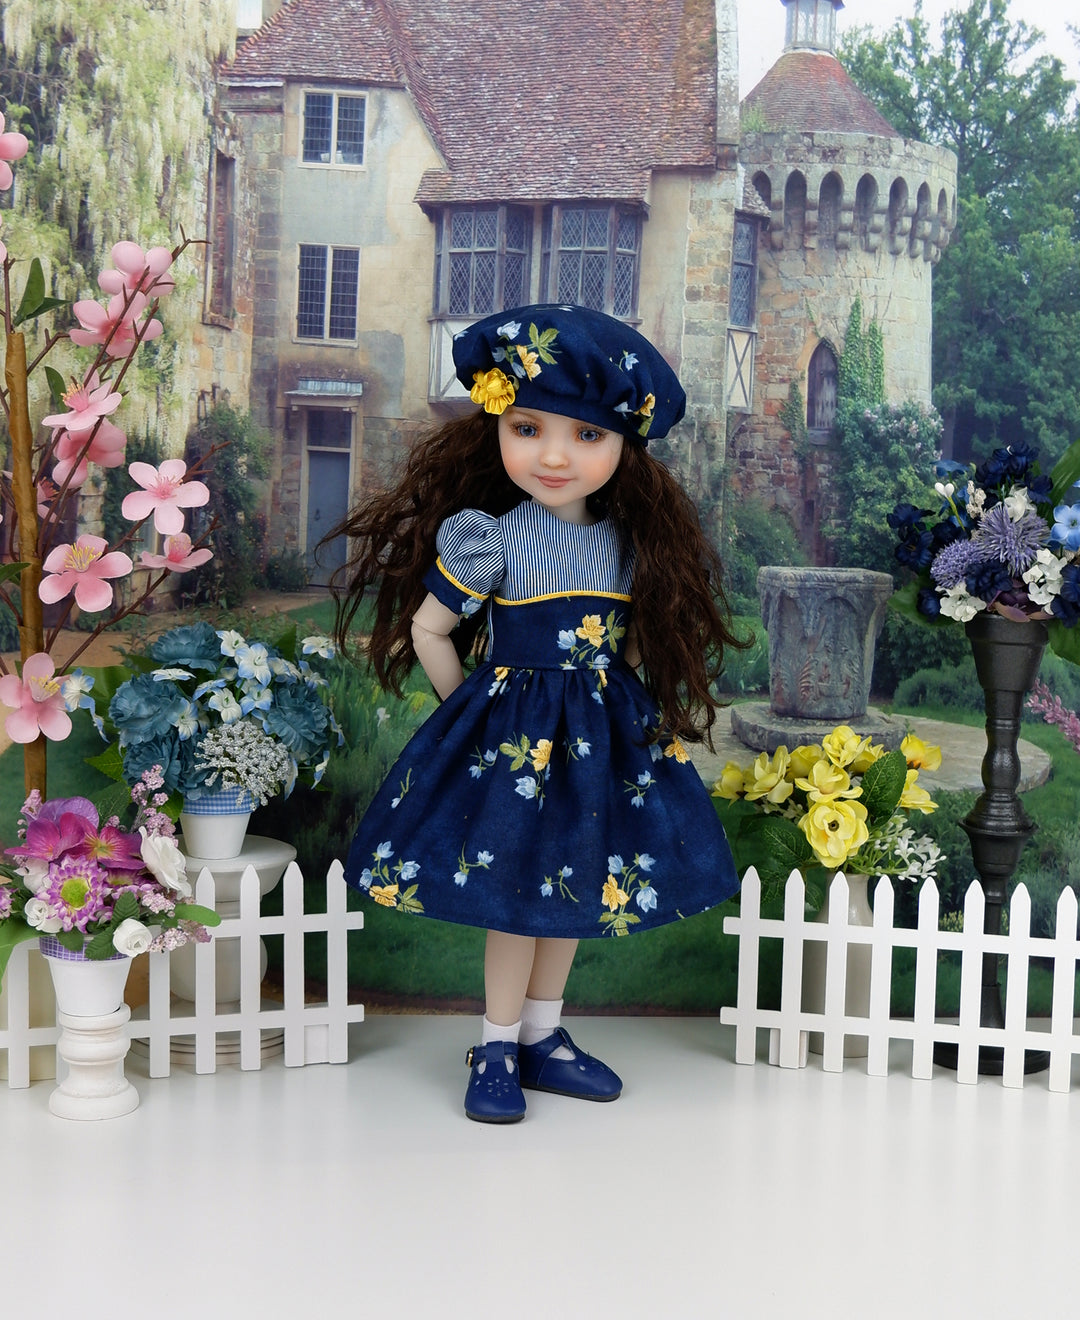 My Favorite Rose - dress with shoes for Ruby Red Fashion Friends doll